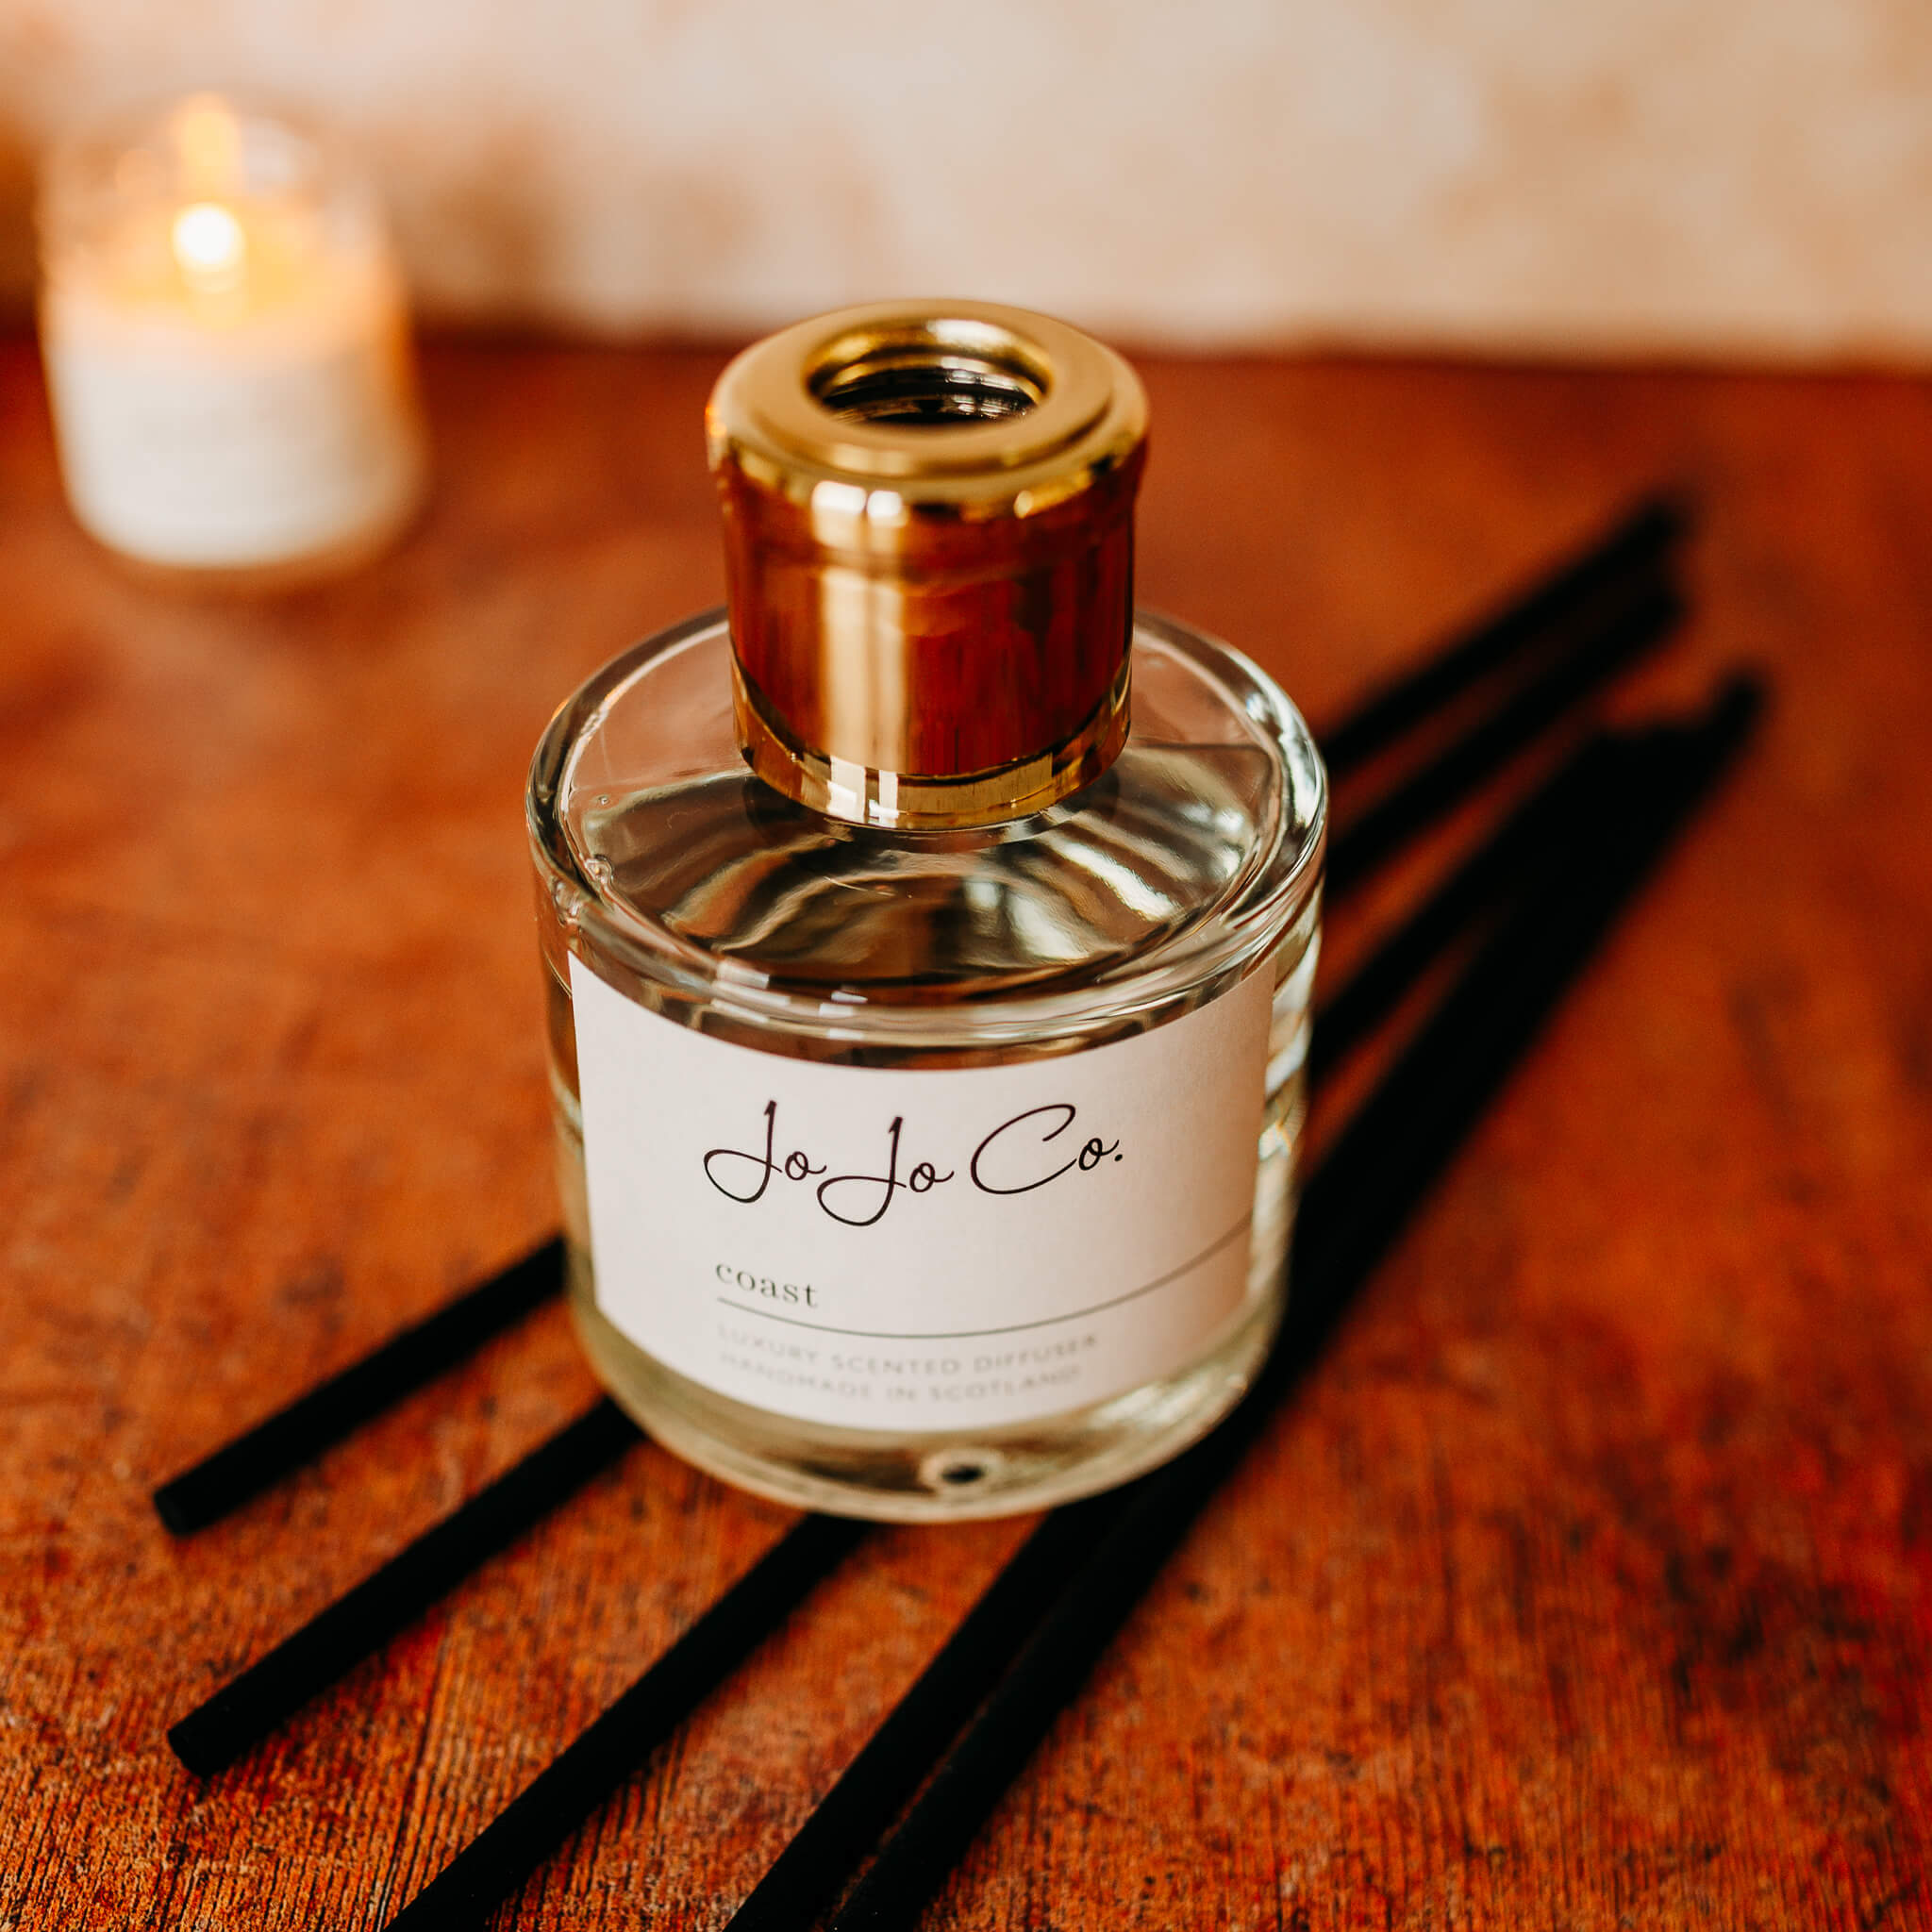 A glass diffuser with white JoJo Co. label and gold lid sits on top of black reeds on a wooden floor. In the background is a blurred lit candle. 